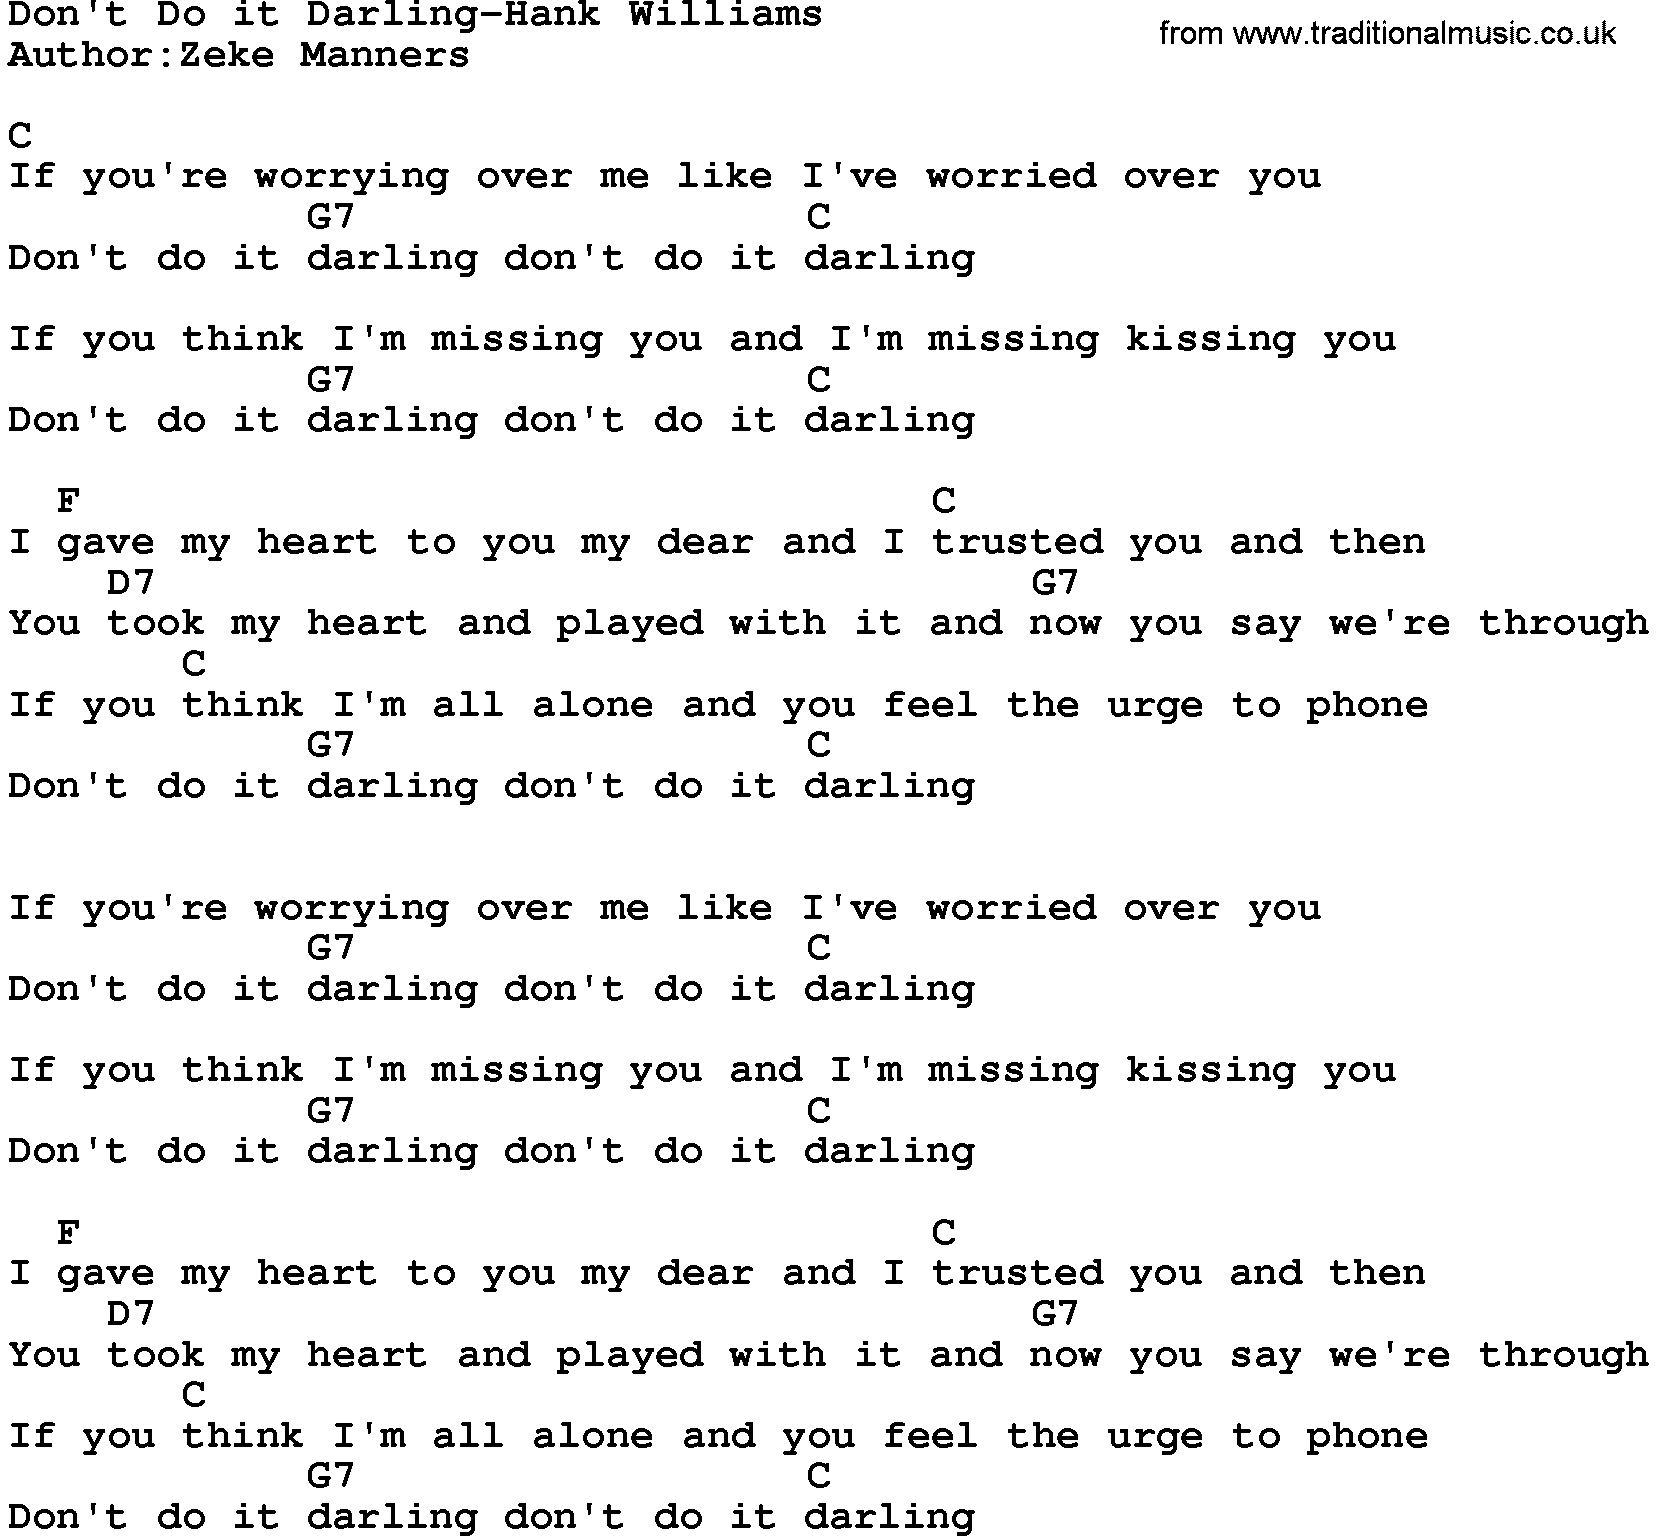 Country music song: Don't Do It Darling-Hank Williams lyrics and chords